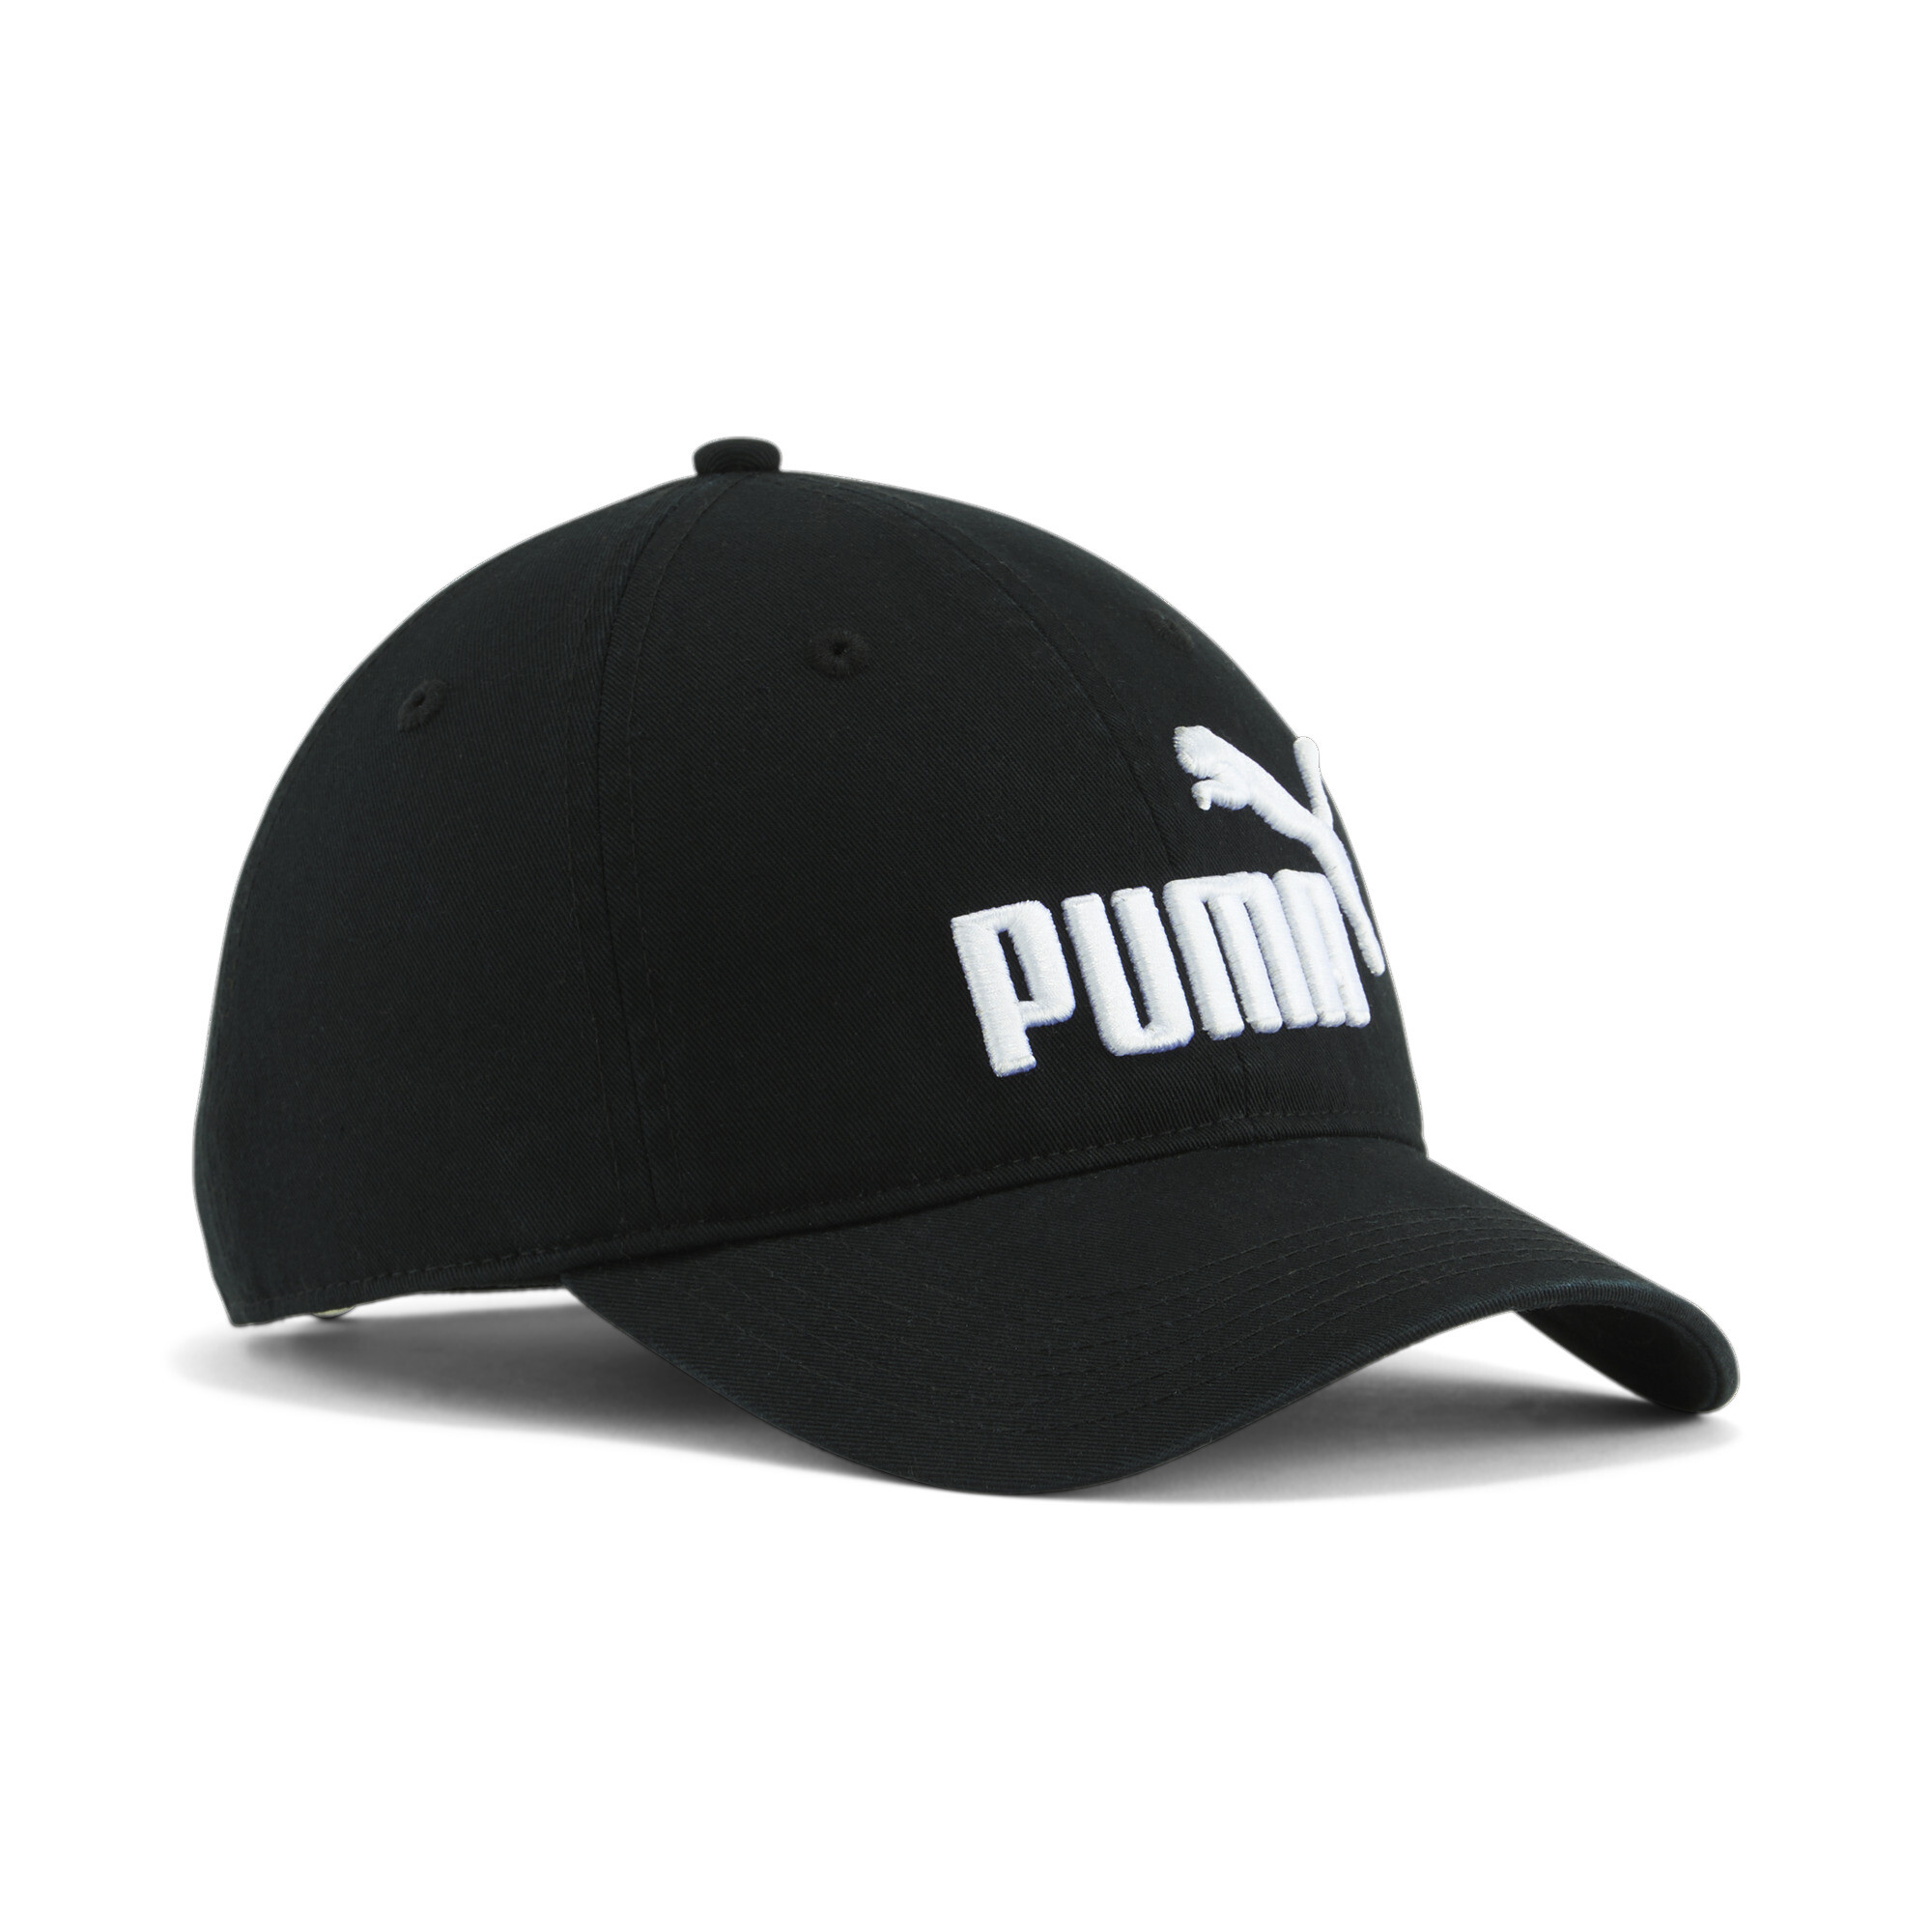 PUMA Men's #1 Relaxed Fit Adjustable Hat